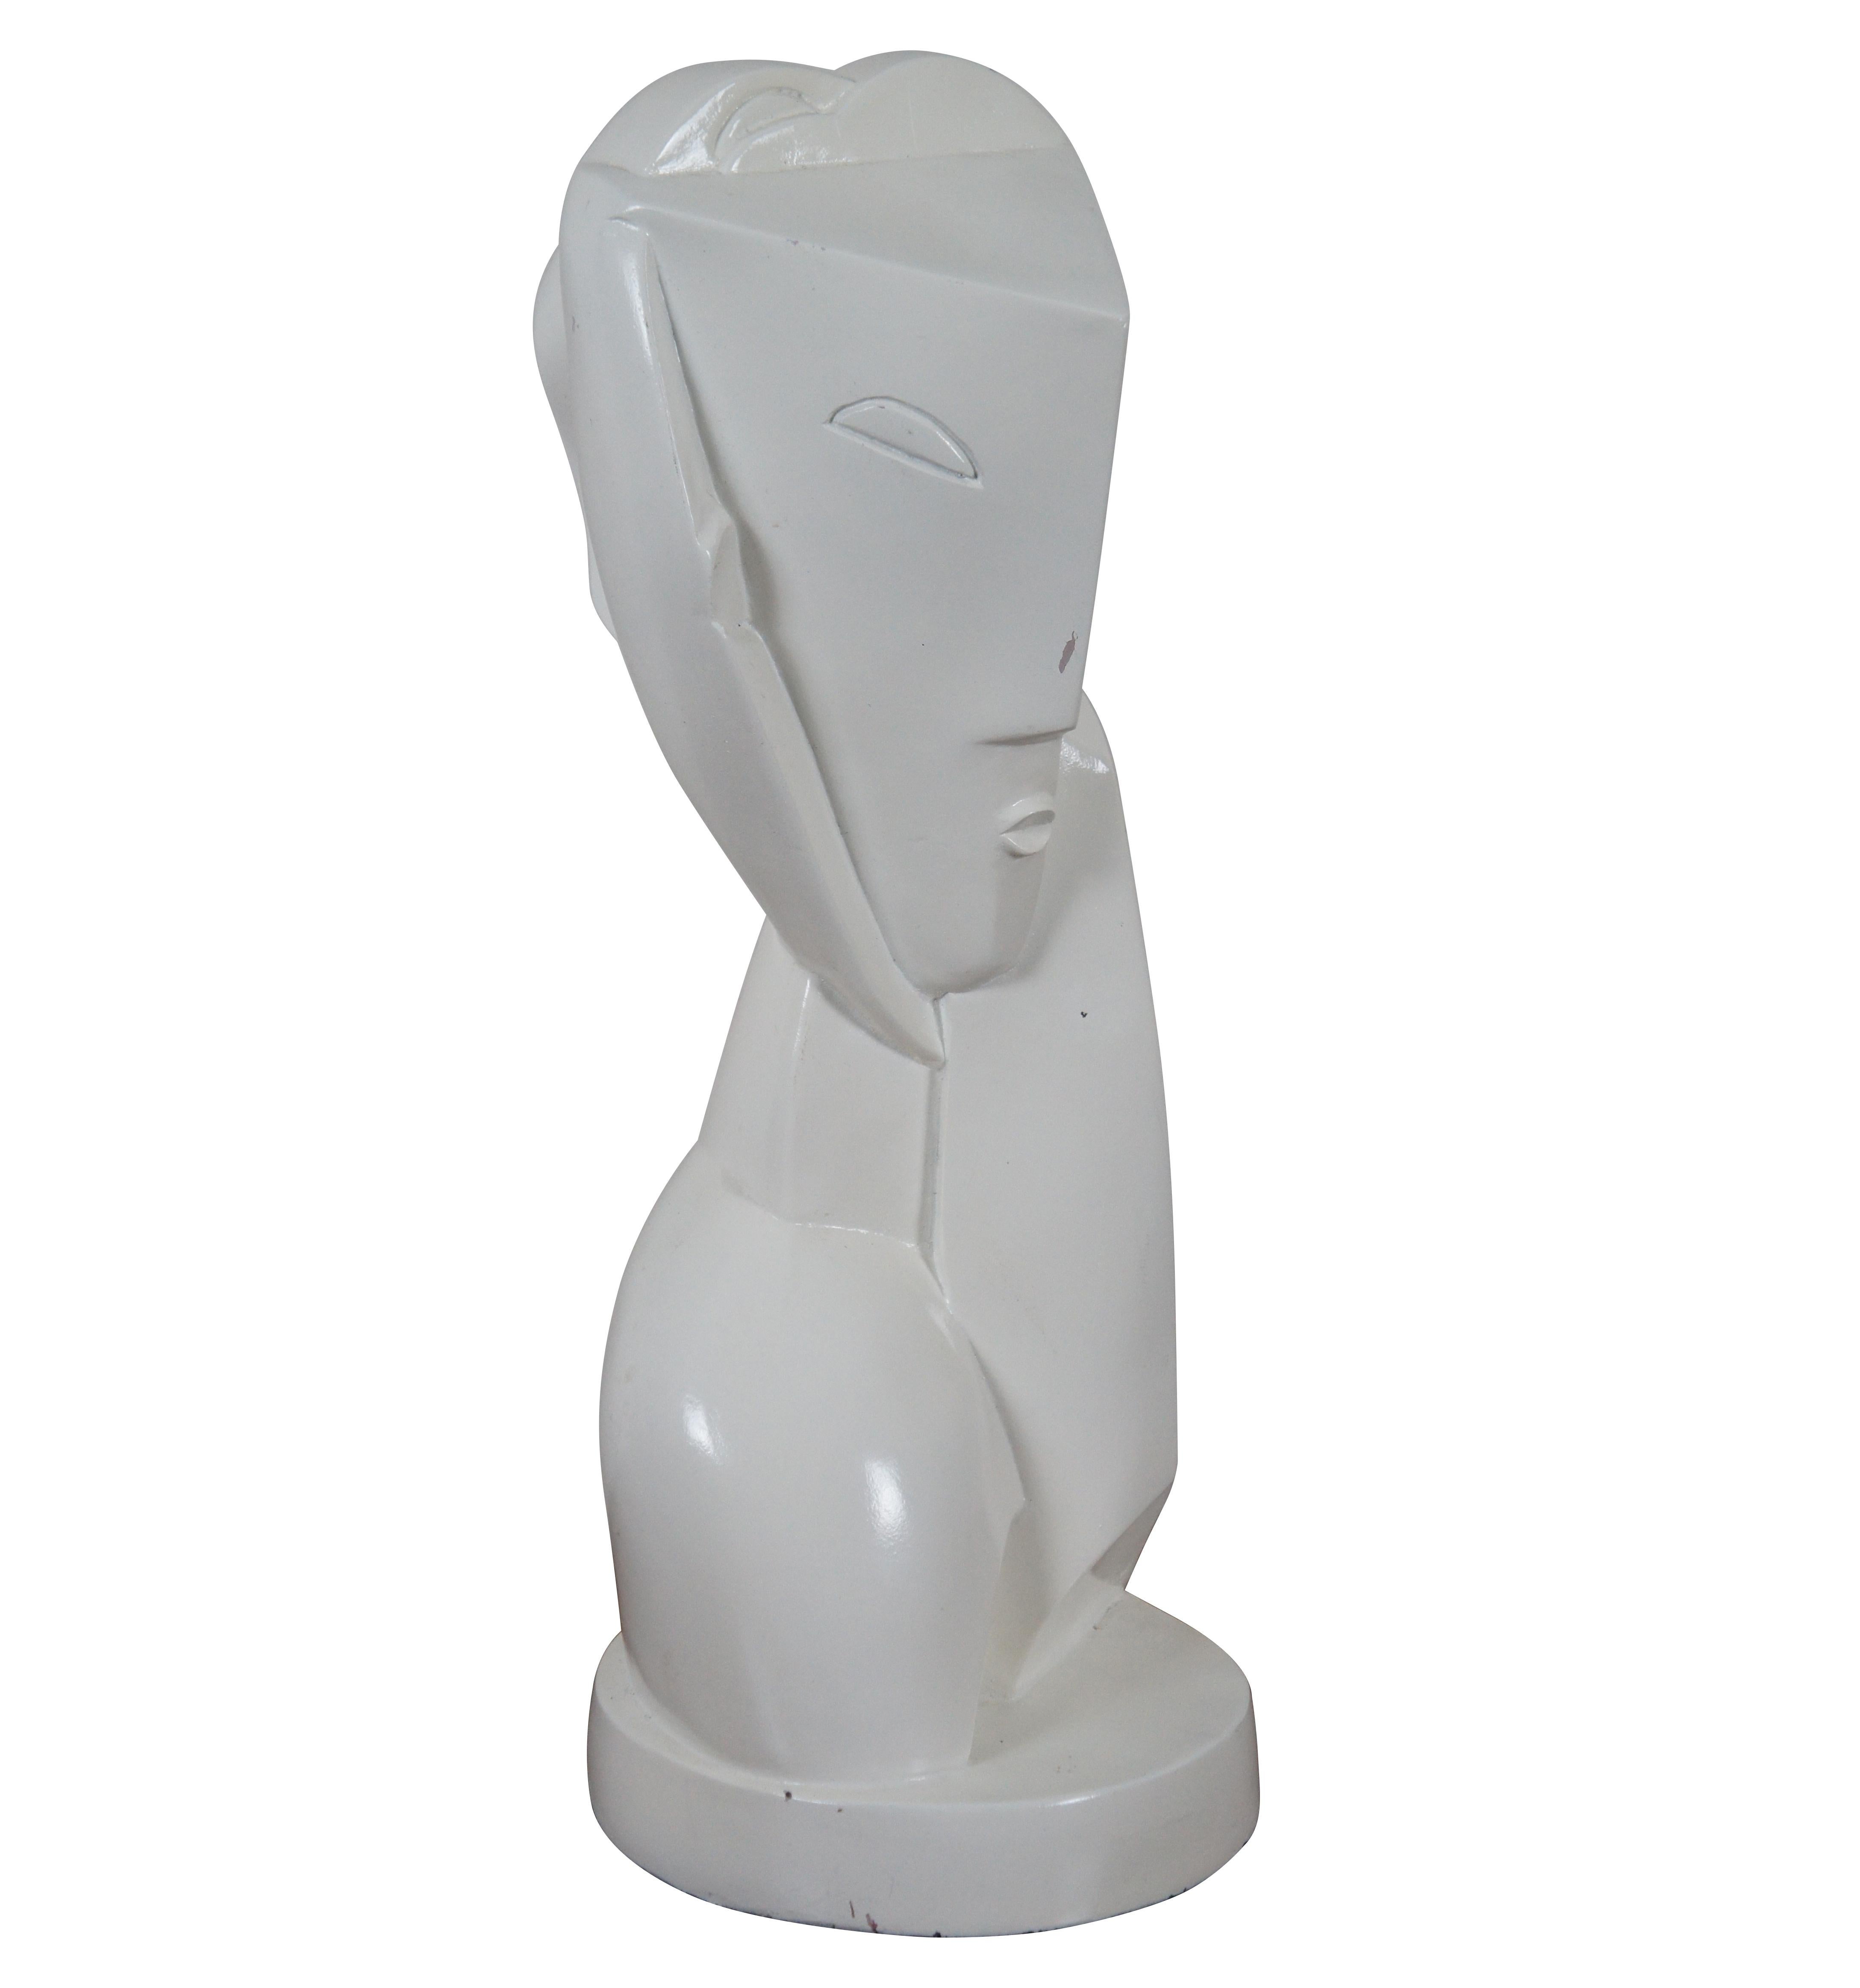 Mid-Century Modern 1961 Austin Products Head of a Young Girl Bust Sculpture After Henri Laurens